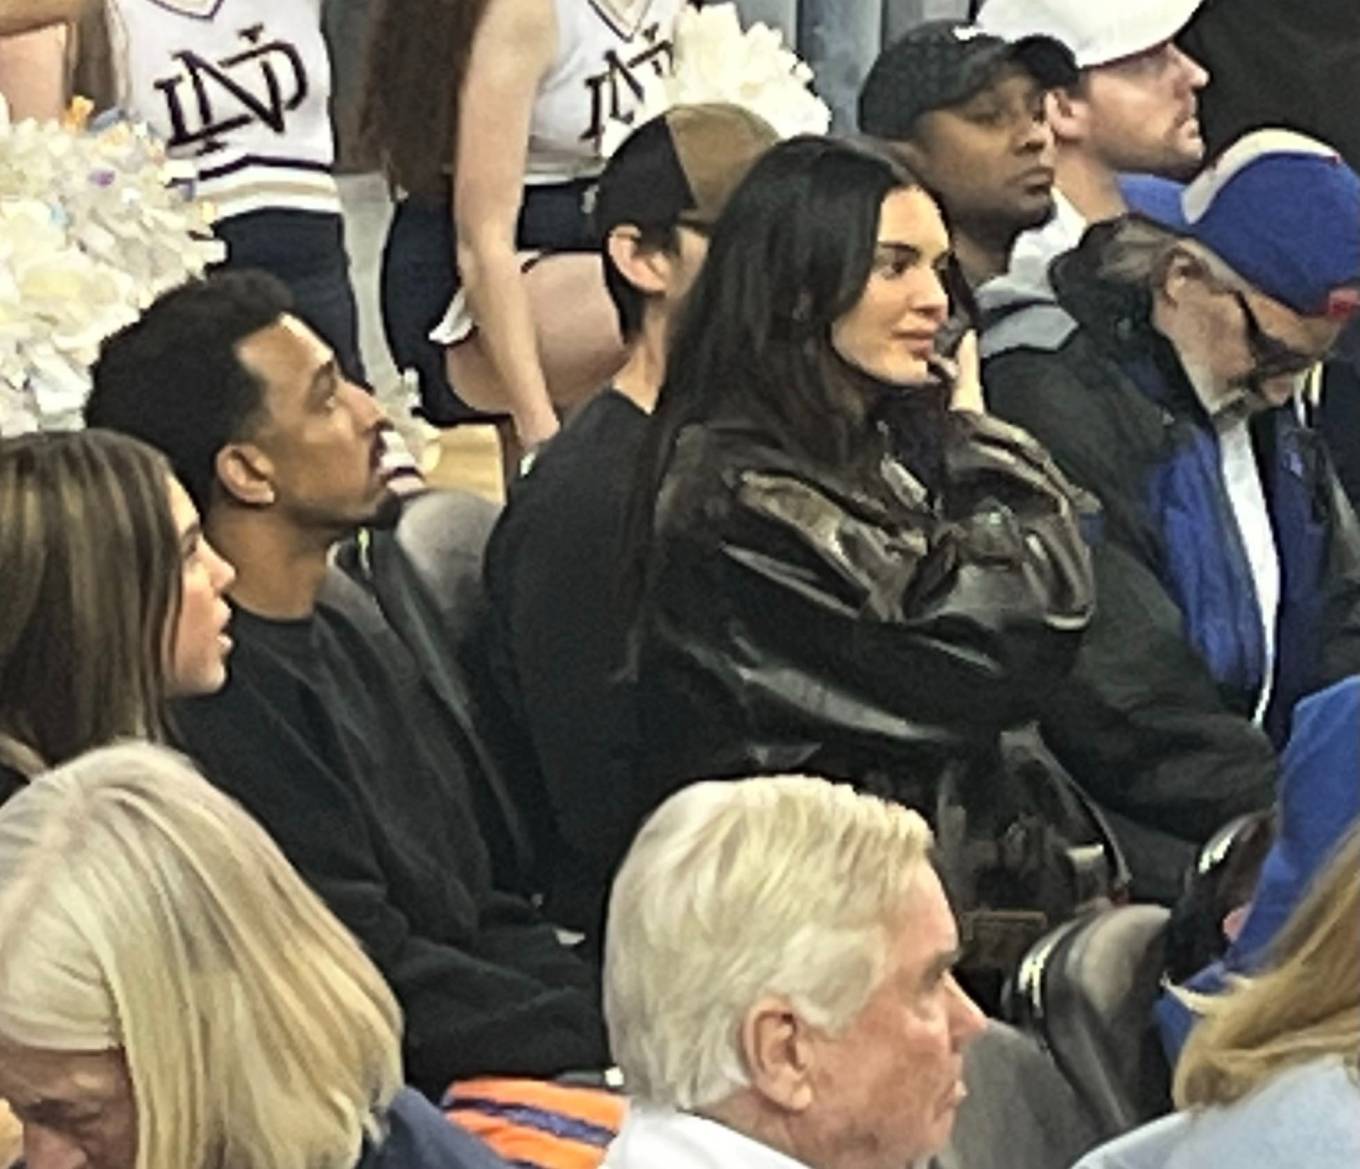 Kendall Jenner - Spotted at basketball game at UCLA's Pauley Pavilion in Los Angeles